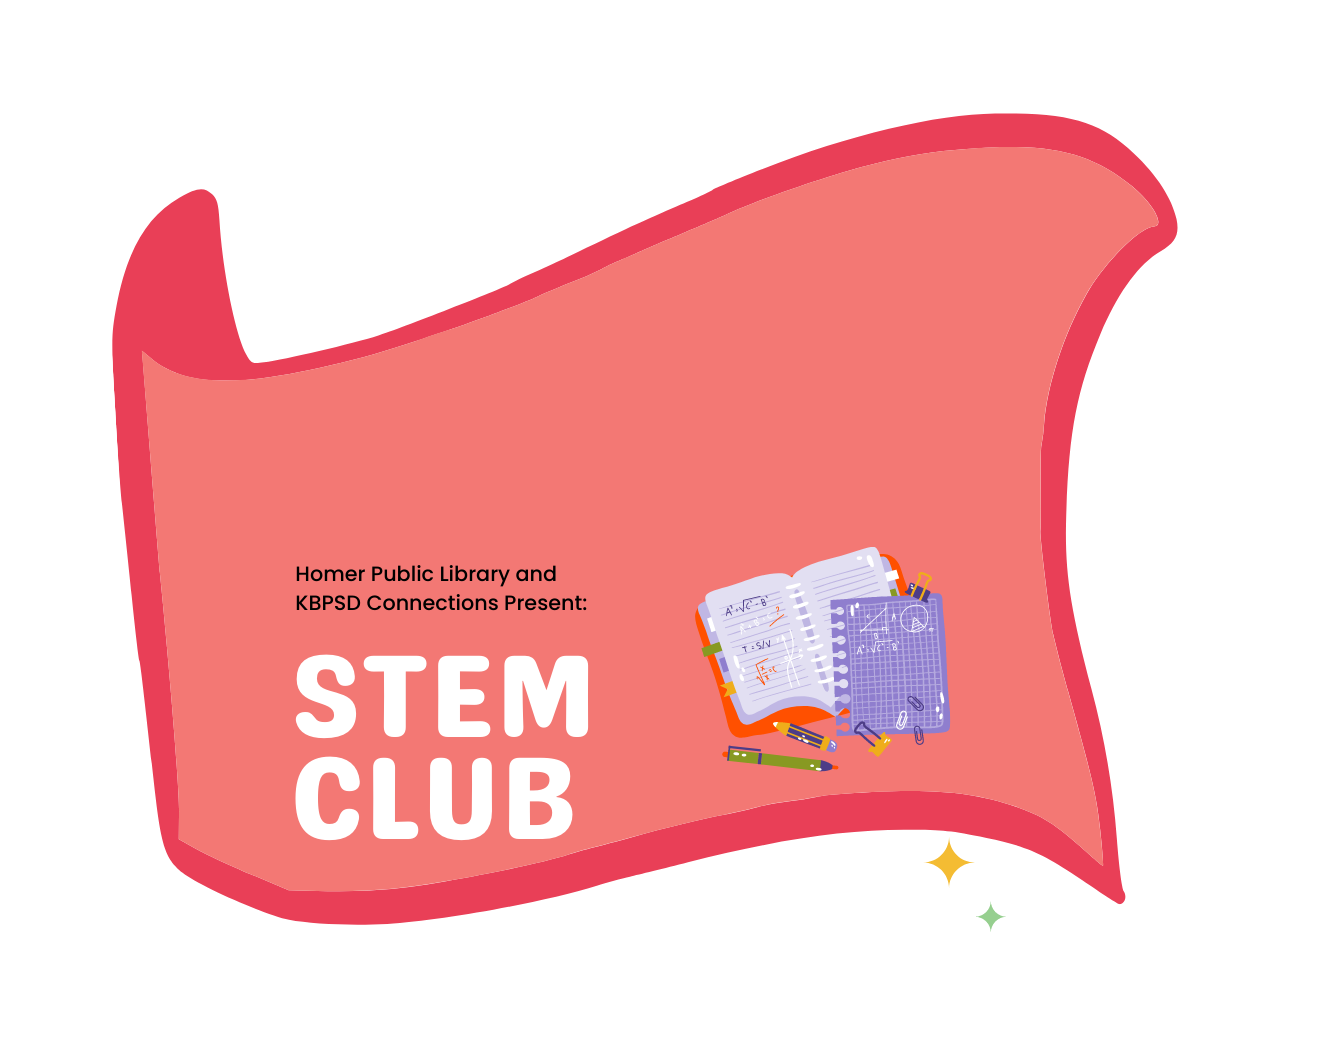 STEM Club pink banner with words stem club and images of notebooks and pencils